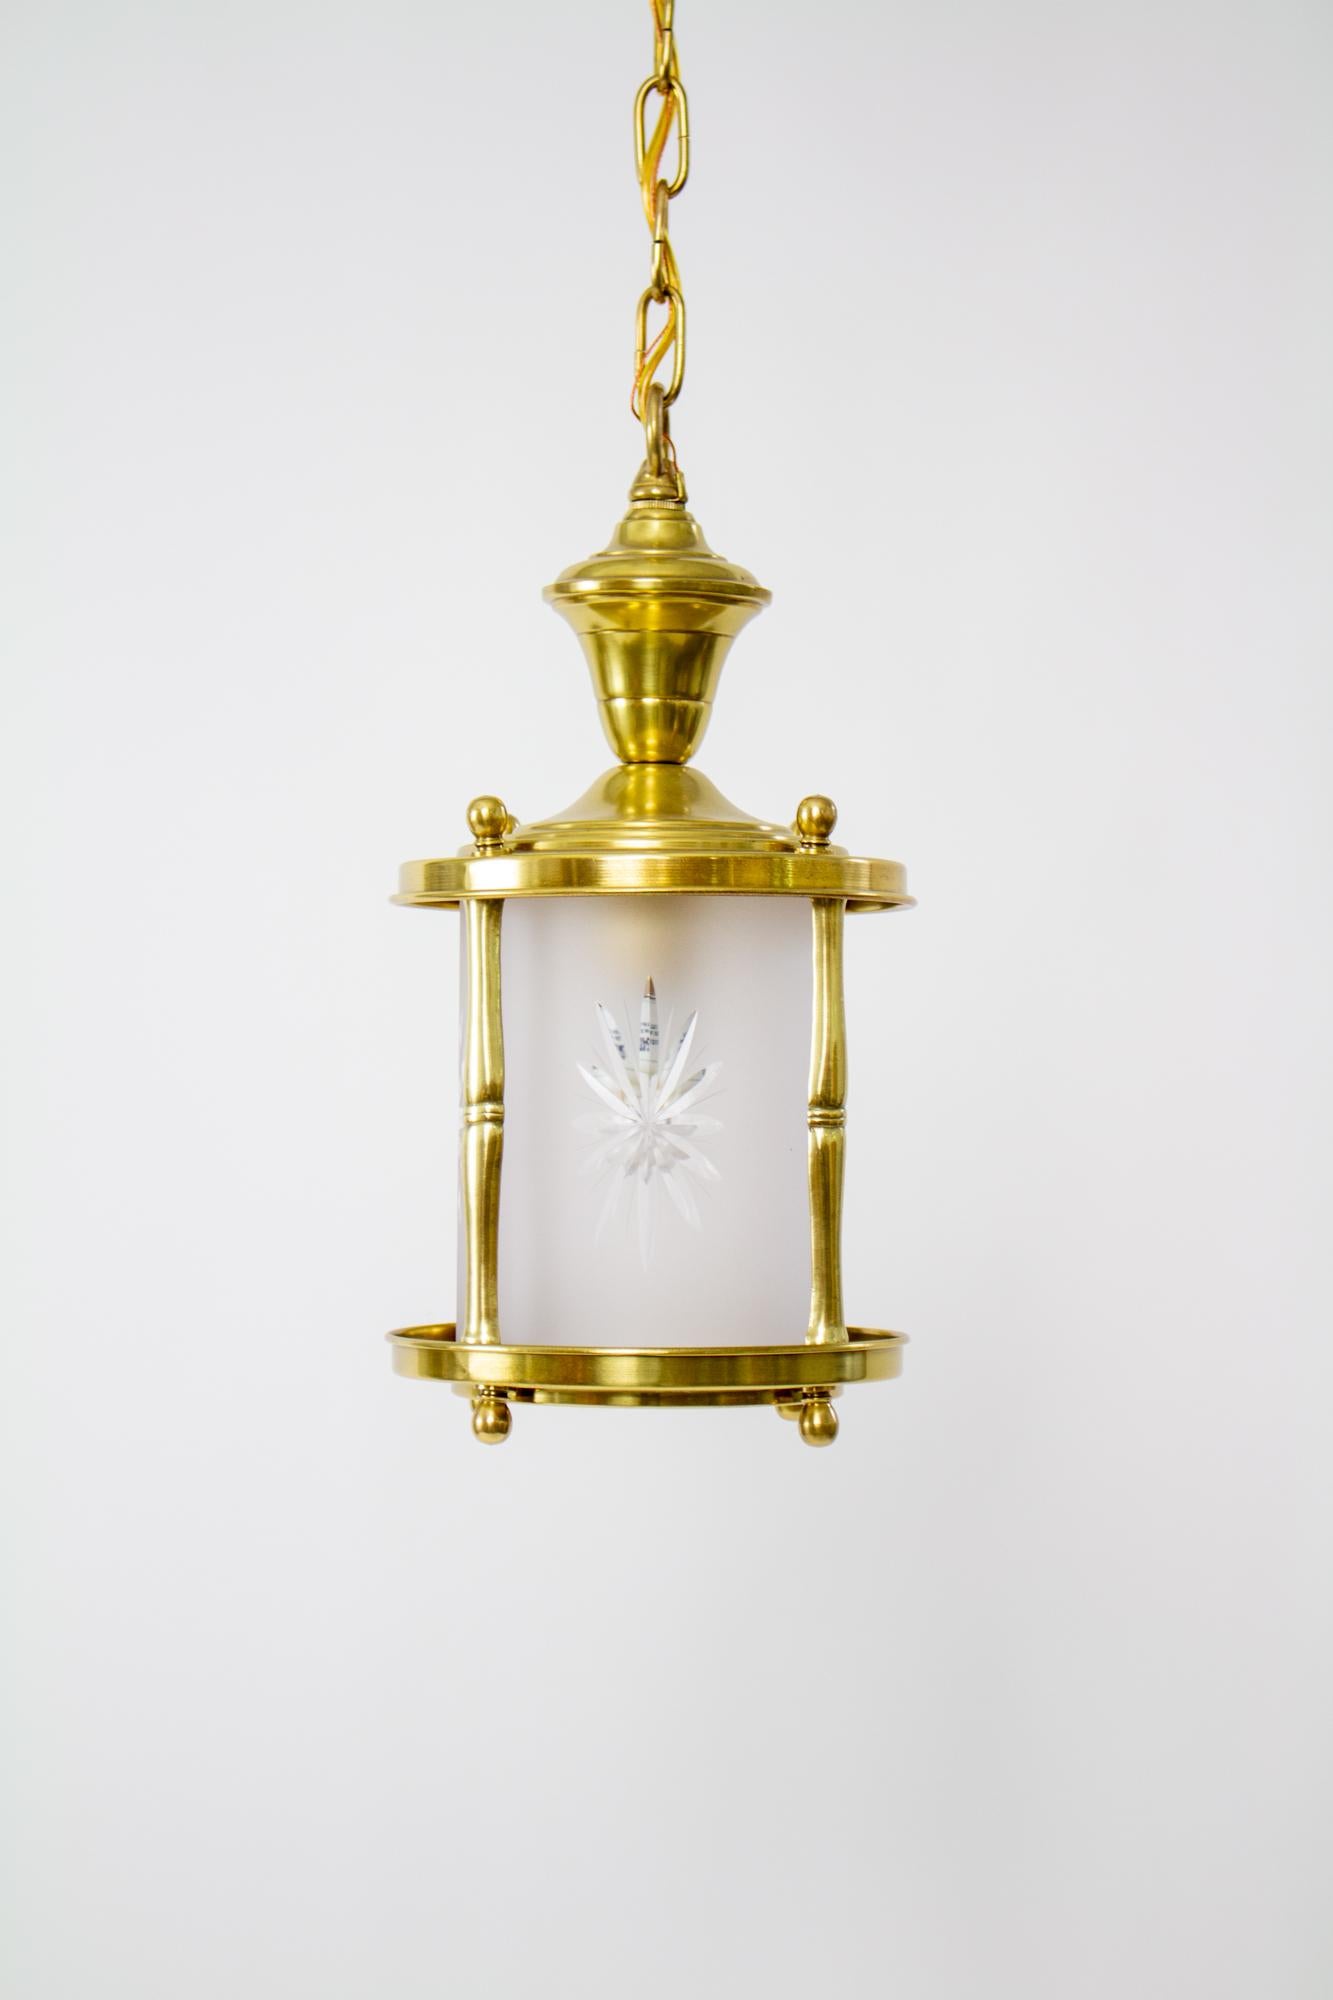 Early 20th Century small lantern with frosted star cut glass. Colonial revival style lantern, all brass with a top and bottom brass ring, four columns and knobs at top and bottom. The central glass cylinder is original and in excellent condition. It